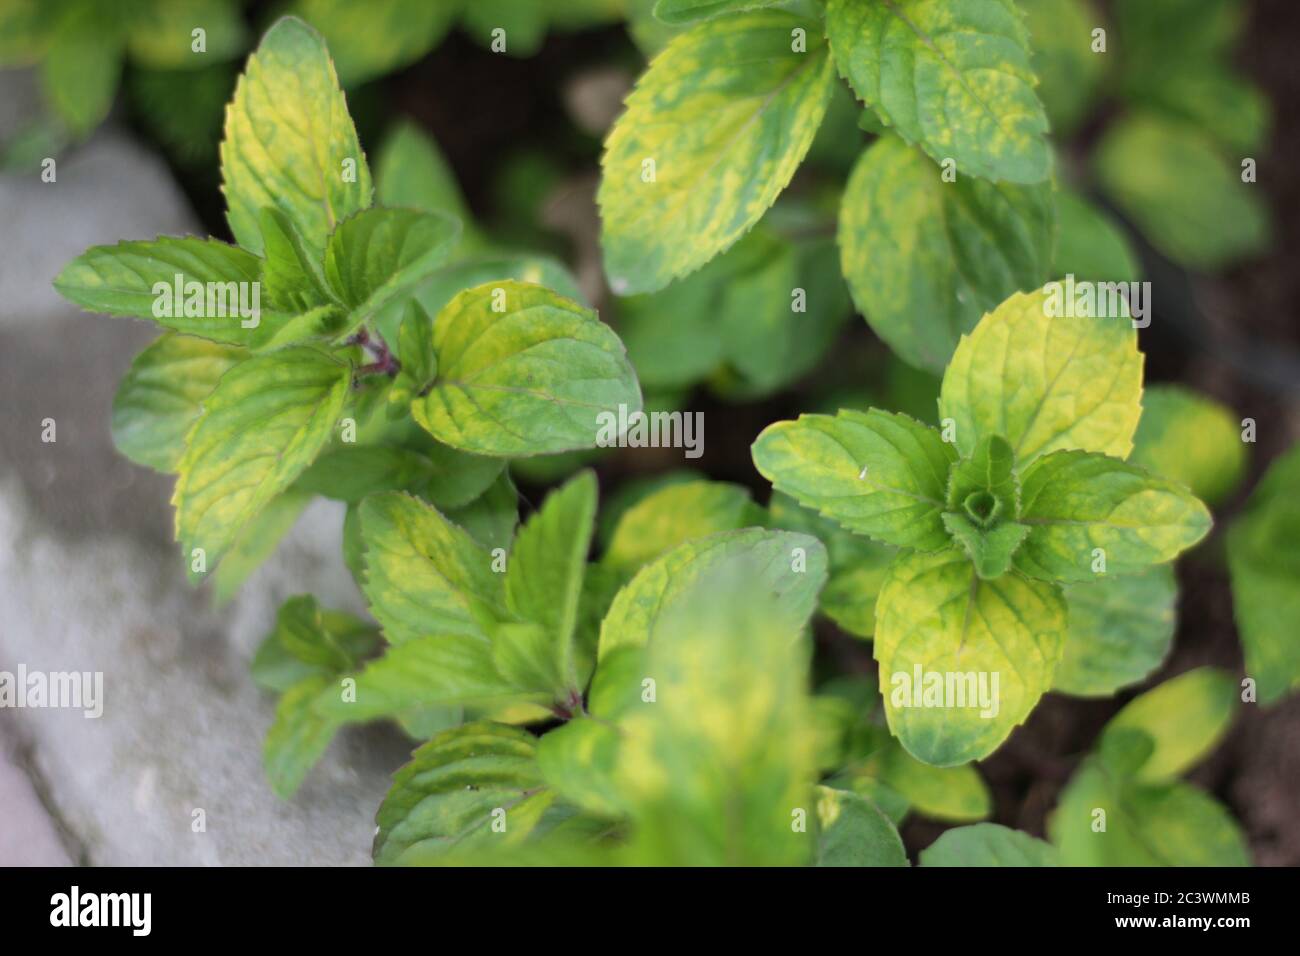 green mint plant in growth at vegetable garden Stock Photo